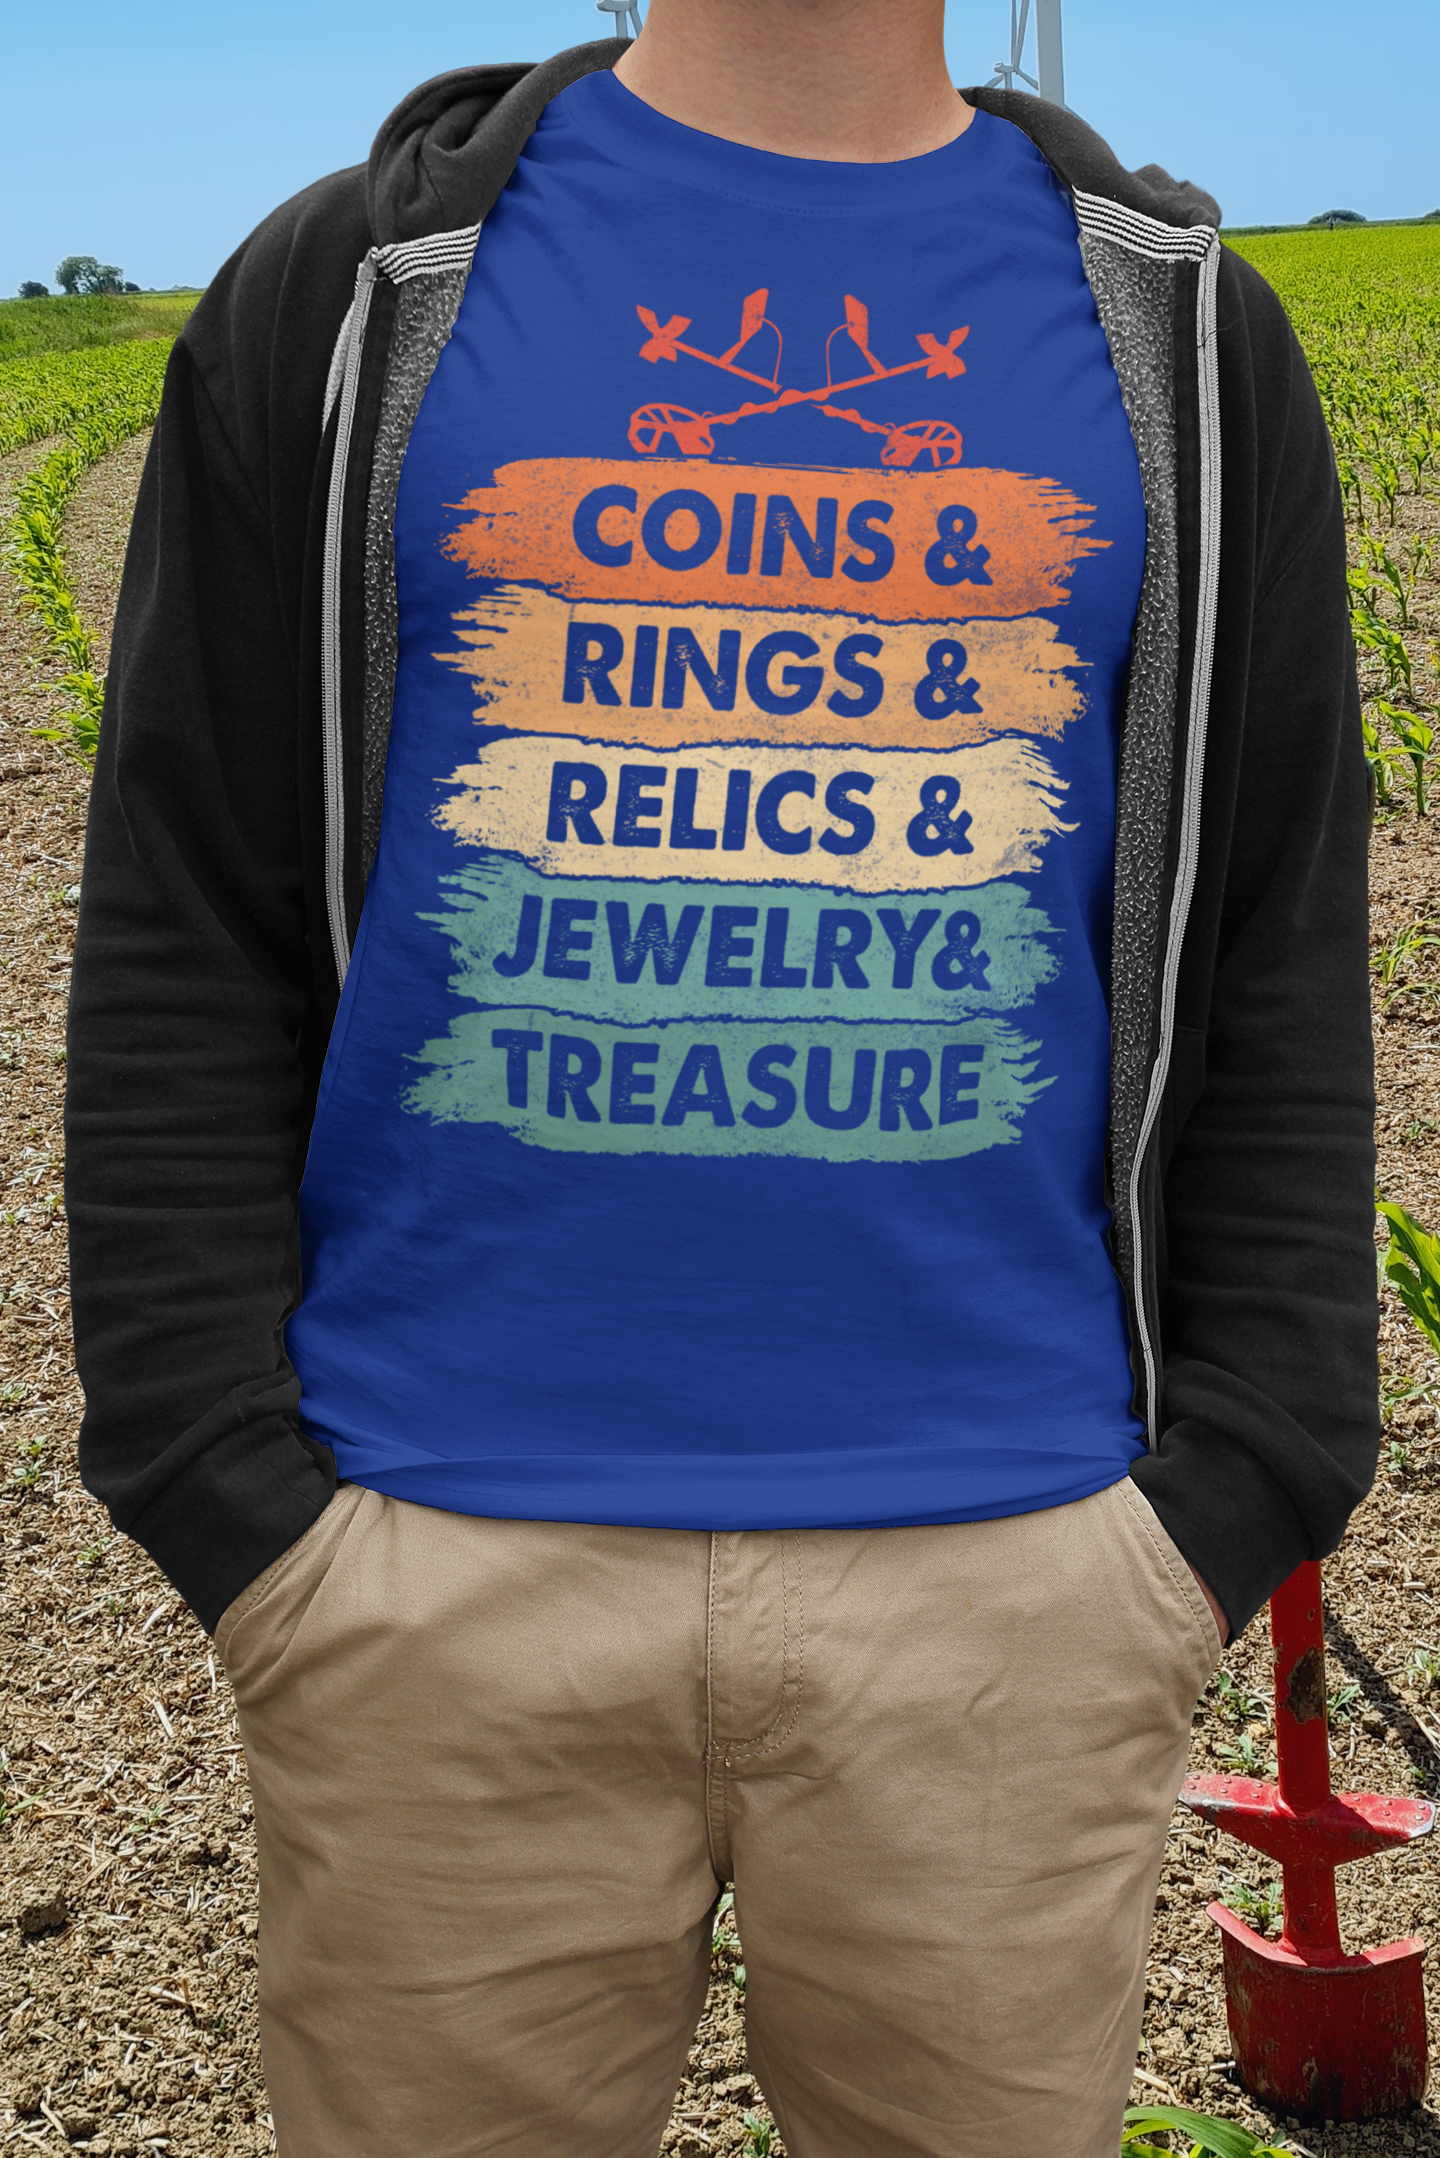 Coin & Rings & Relics & Jewelry & Treasure T-shirt